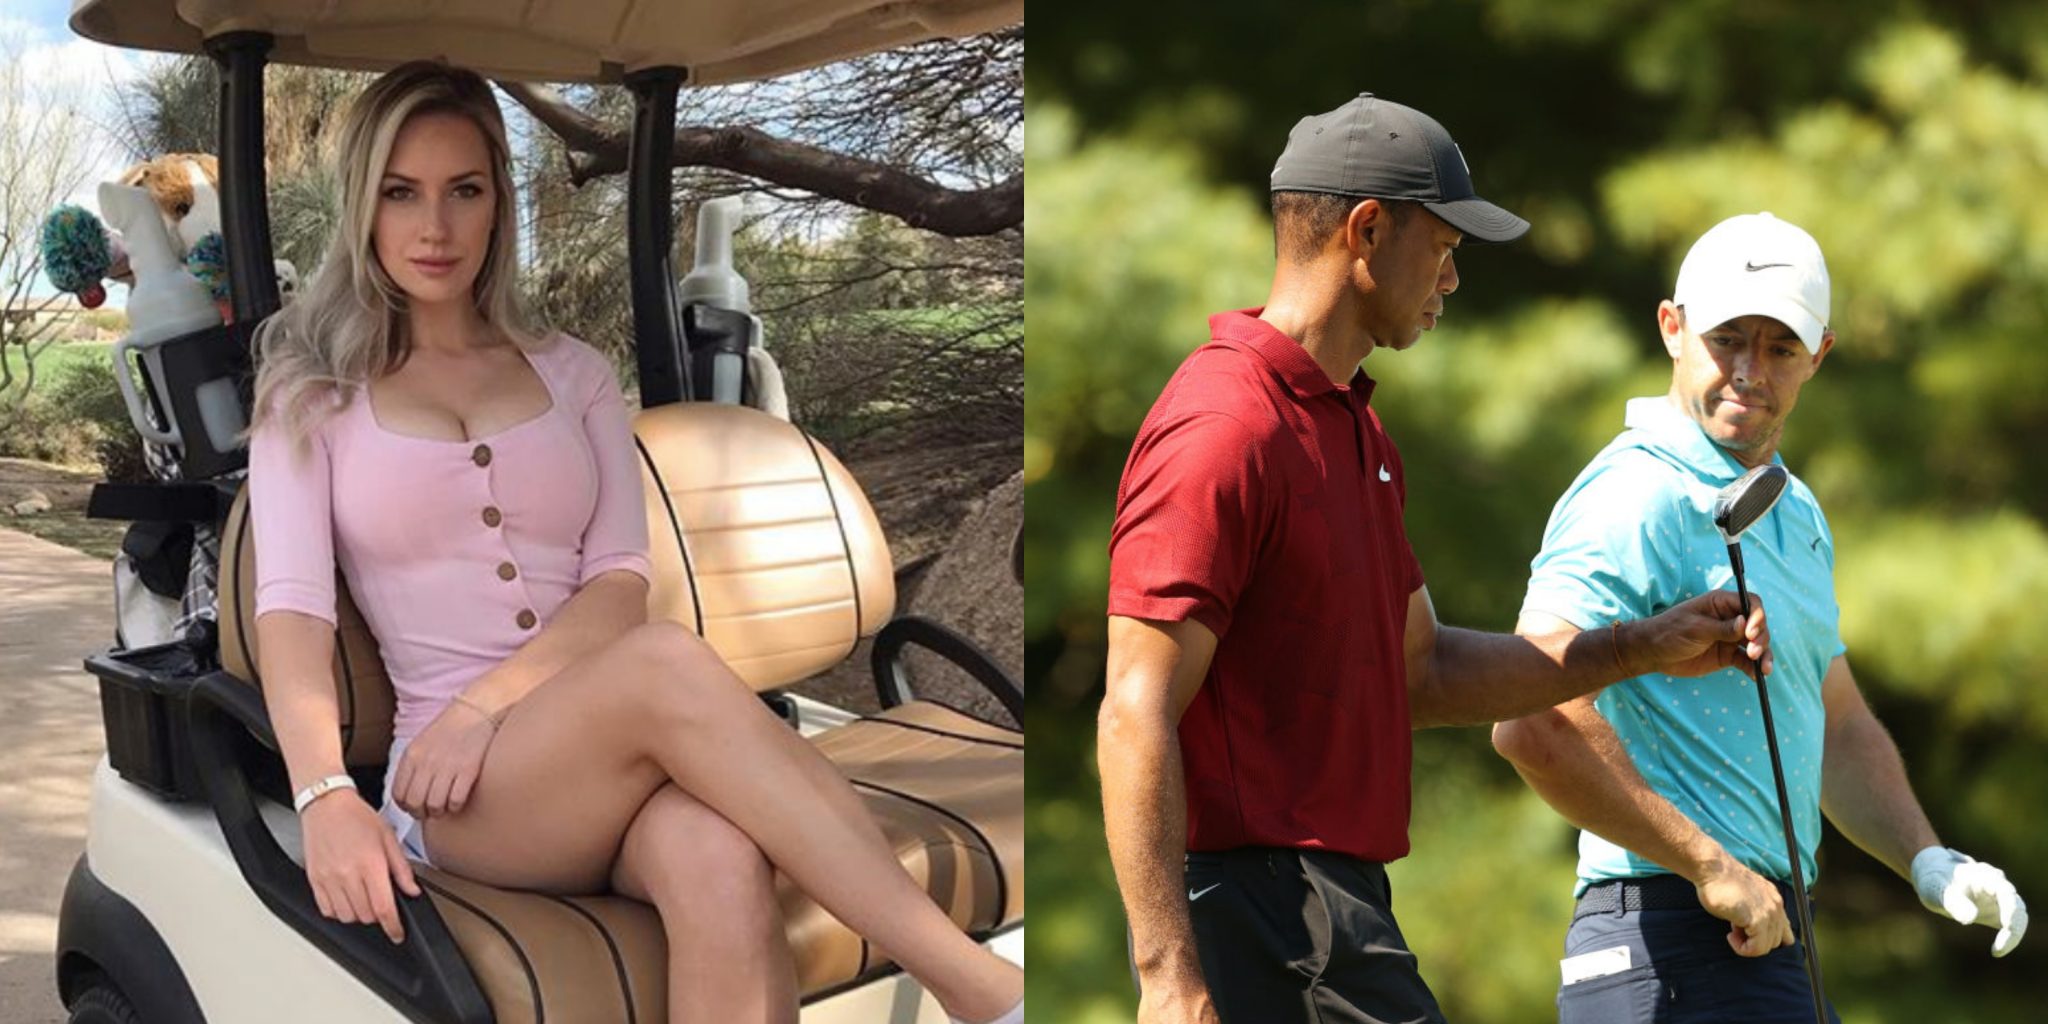 Golf Sensation Paige Spiranac Earns More Than Tiger Woods And Rory Mcilroy Per Instagram Post Pic 